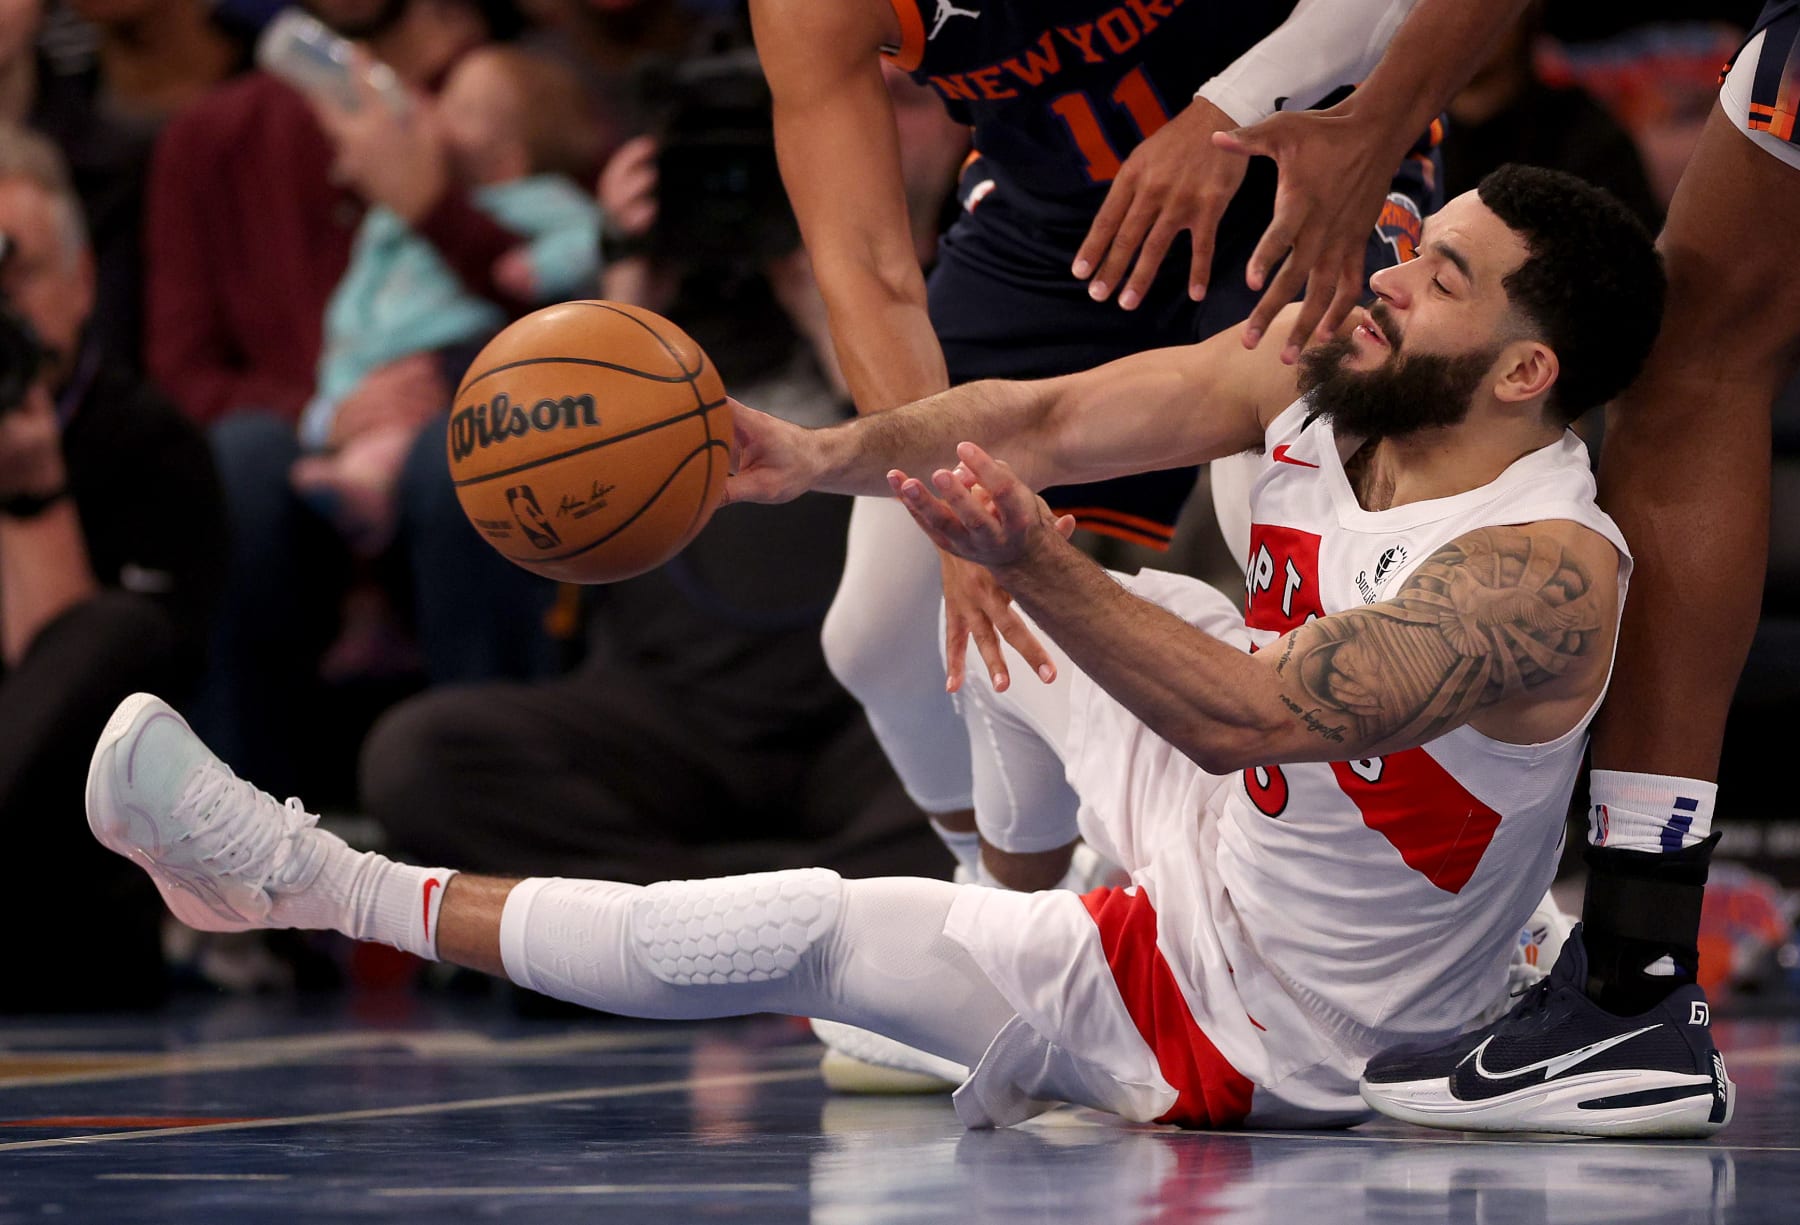 The Utah Jazz should keep an eye out on the Cole Anthony situation